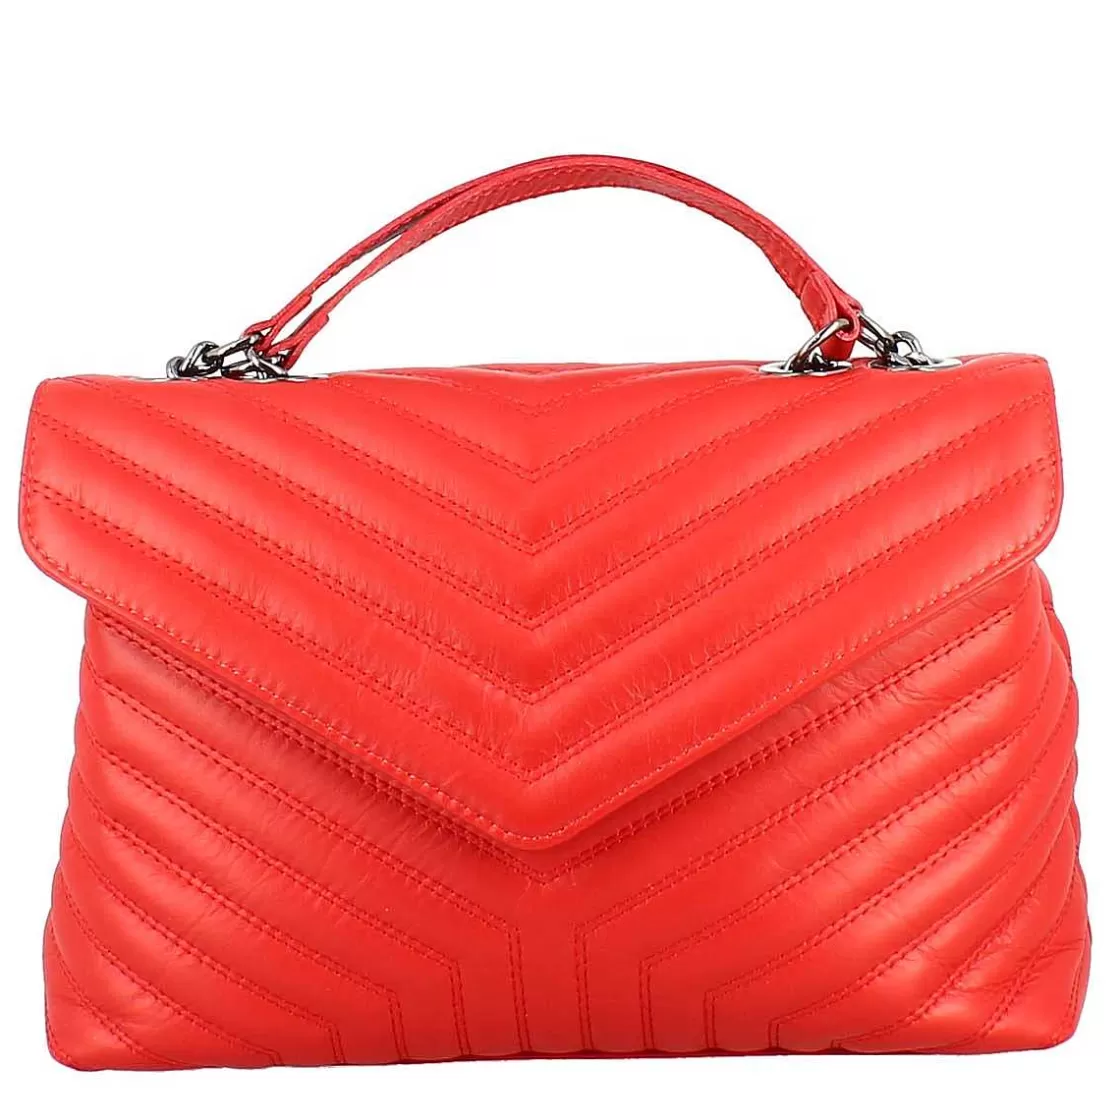 Leonardo Handmade Women'S Handbag With Shoulder Strap In Red Quilted Leather Store